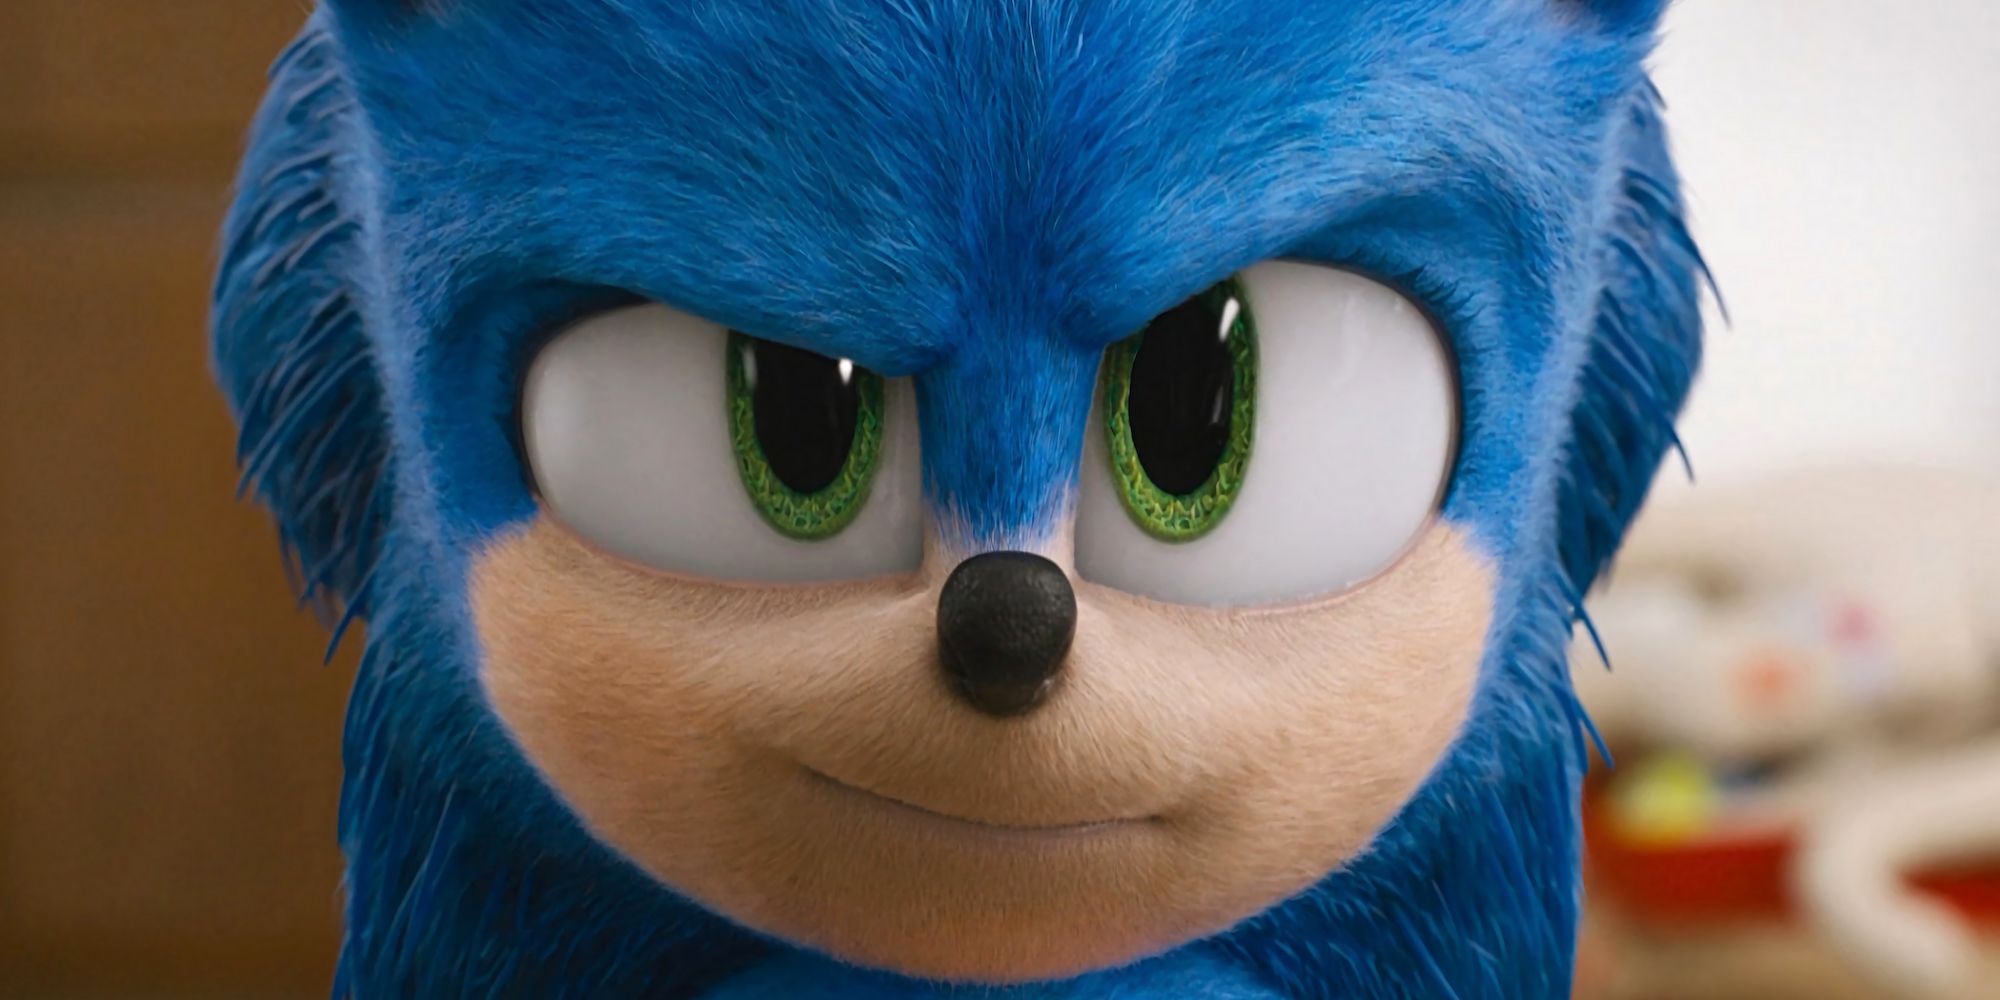 Why was Sonic The Hedgehog's original movie design changed